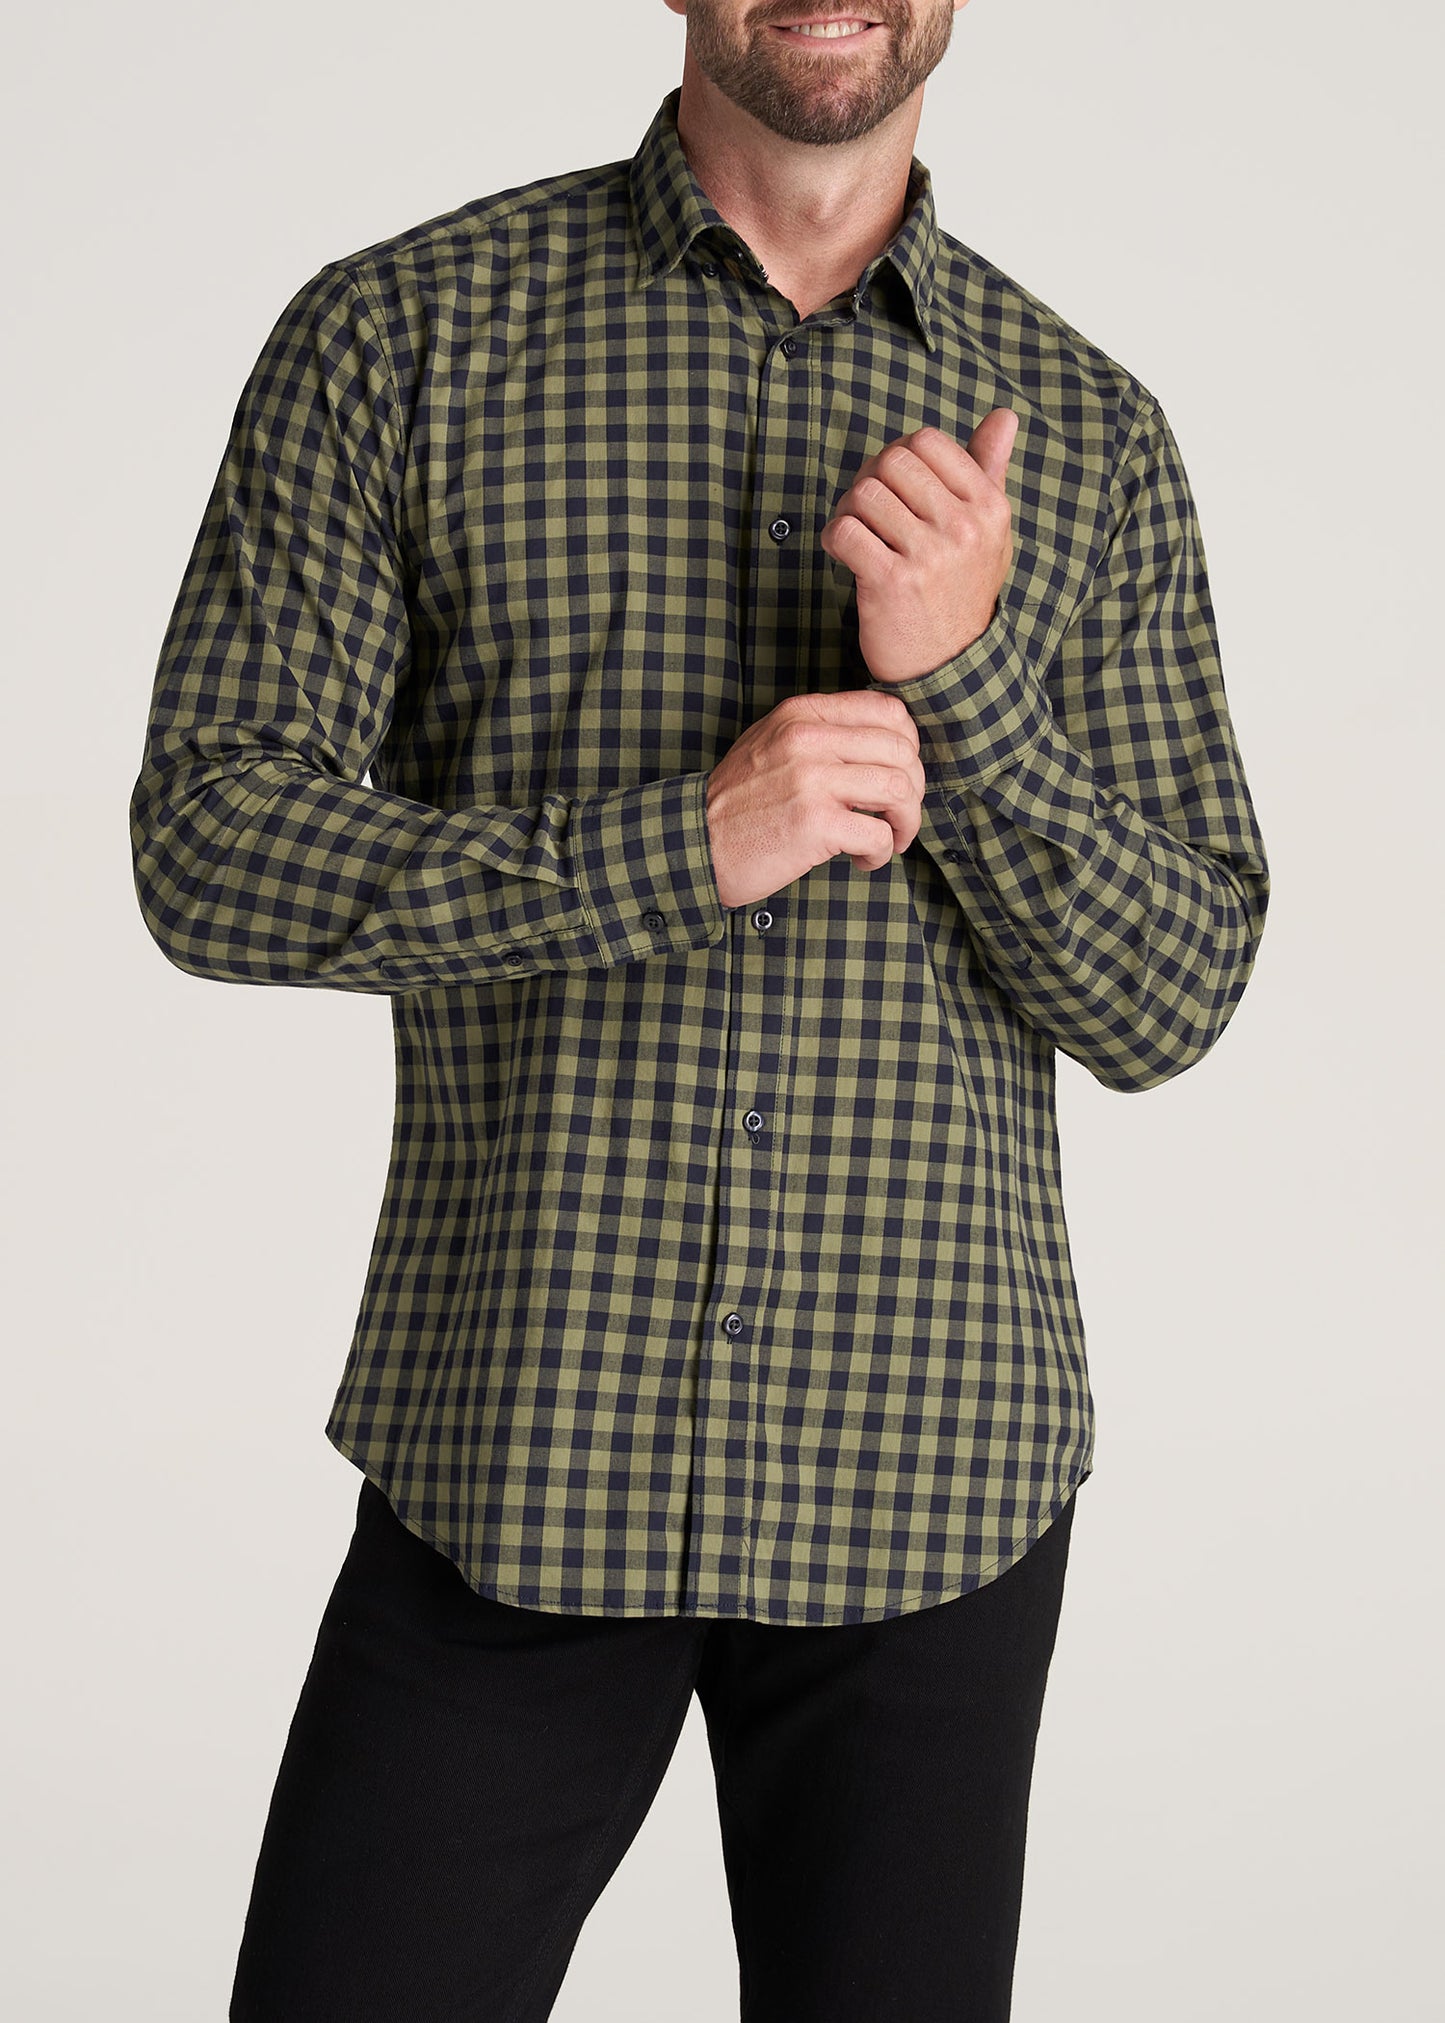       American-Tall-Men-SoftWash-Tall-ButtonUp-Shirt-MidnightBlue-Olive-front